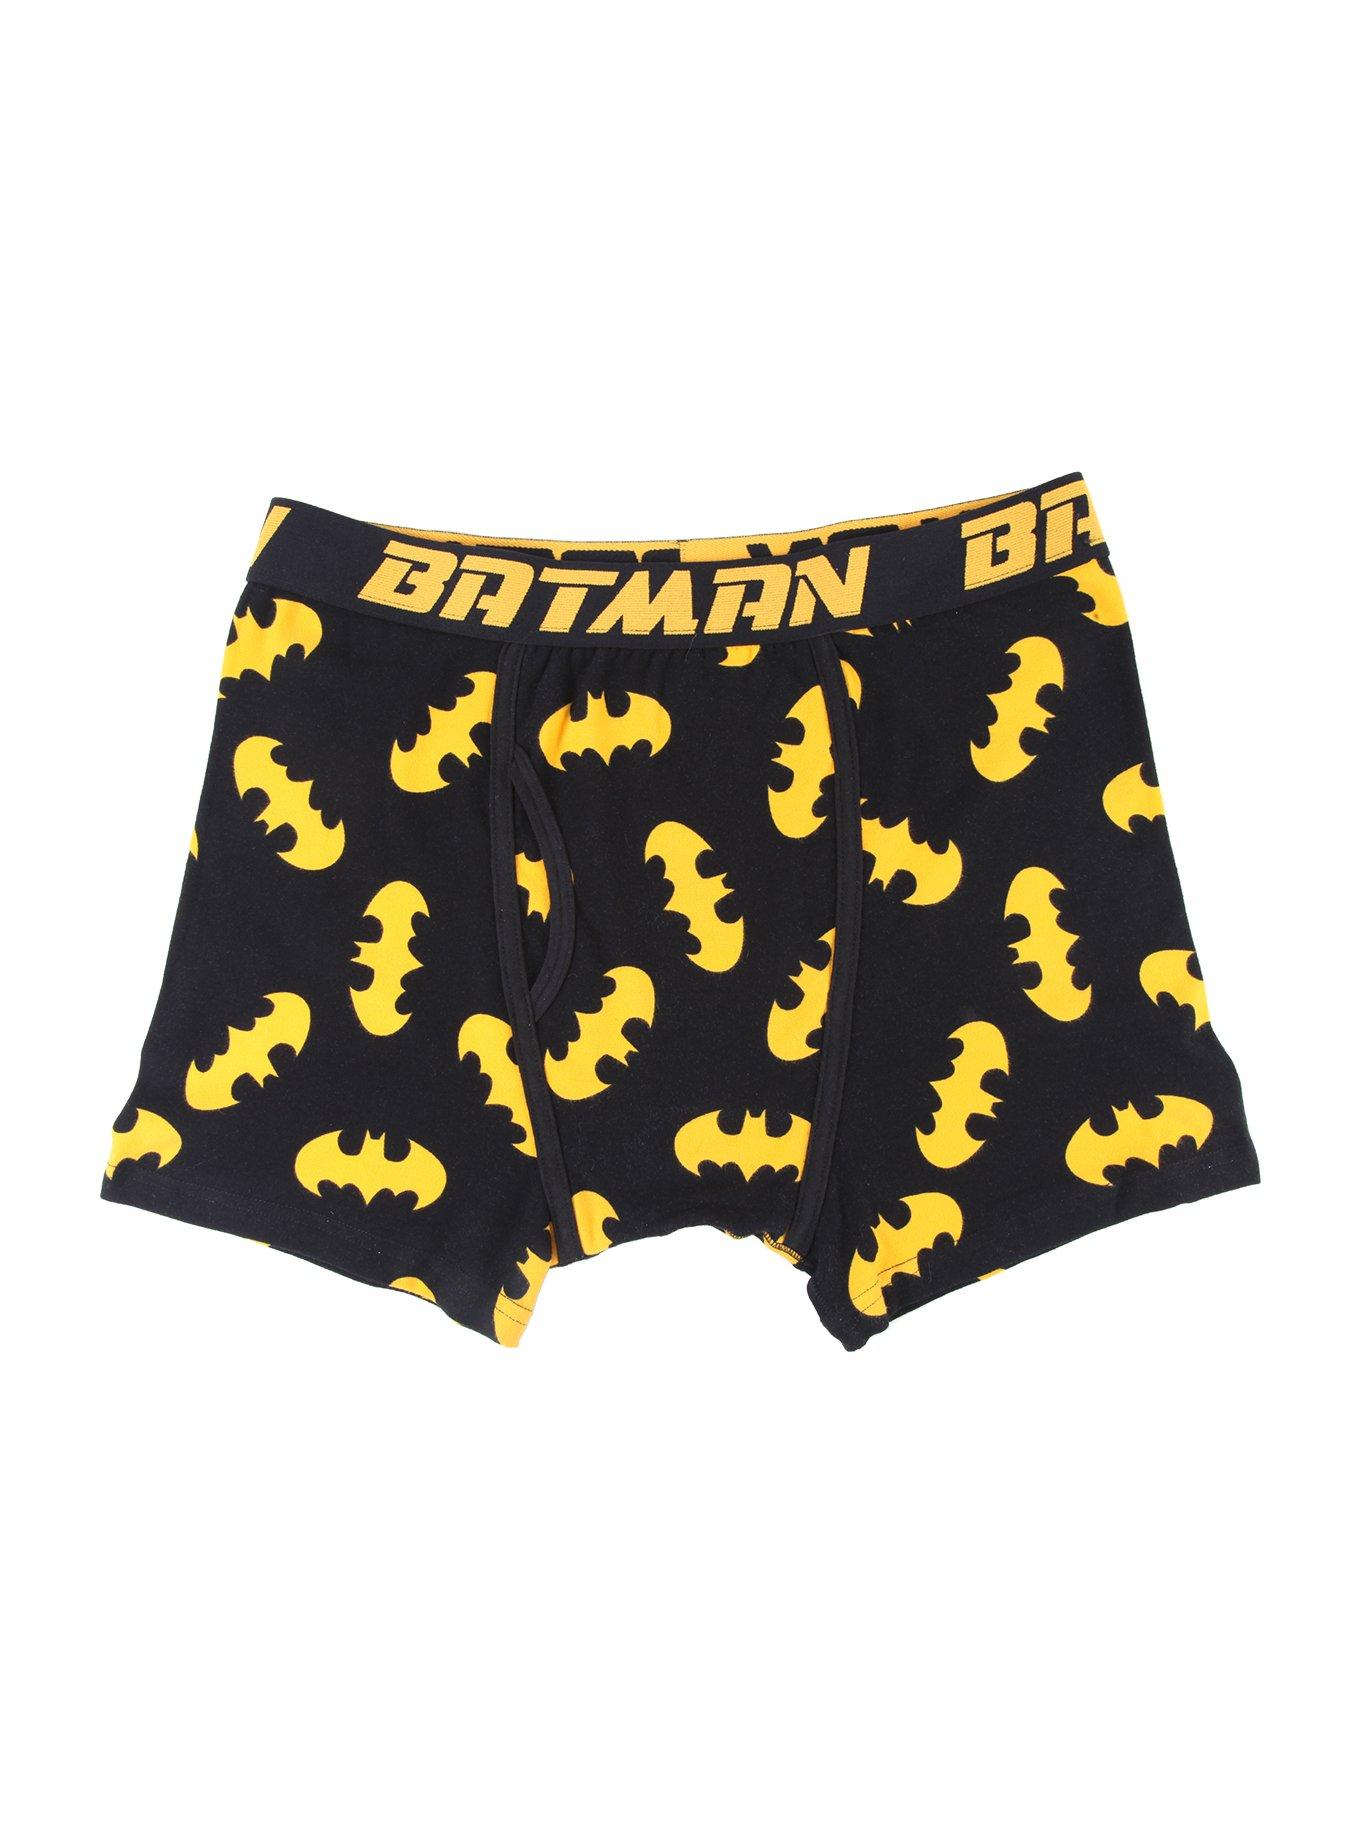 Family Guy Underwear Mens Large Crazy Boxer Briefs Brian in